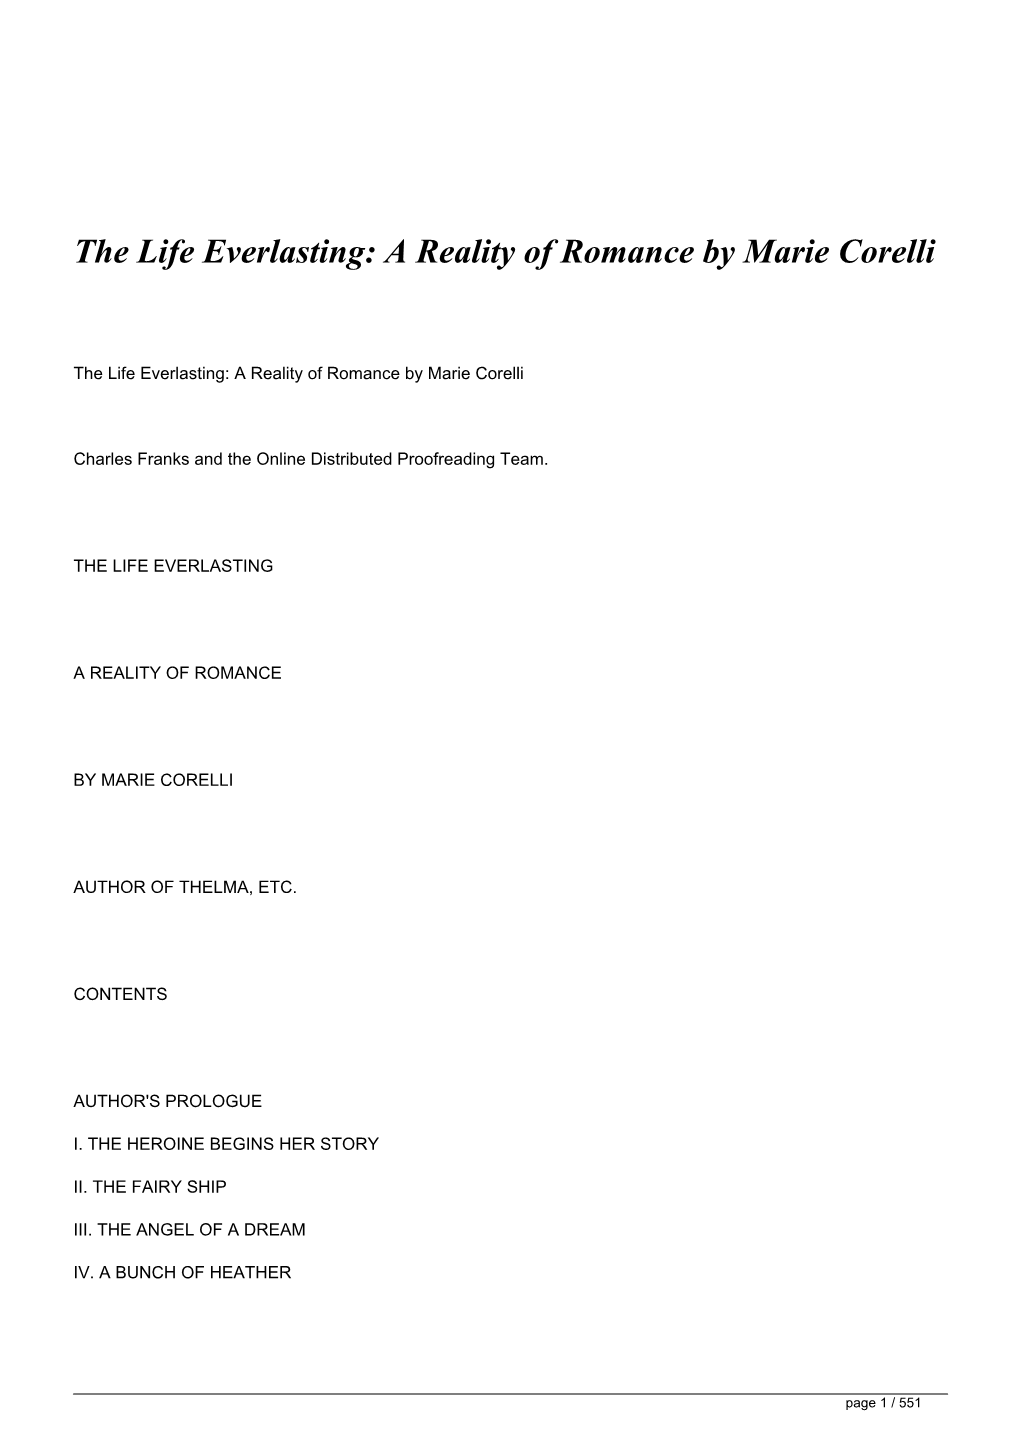 The Life Everlasting: a Reality of Romance by Marie Corelli